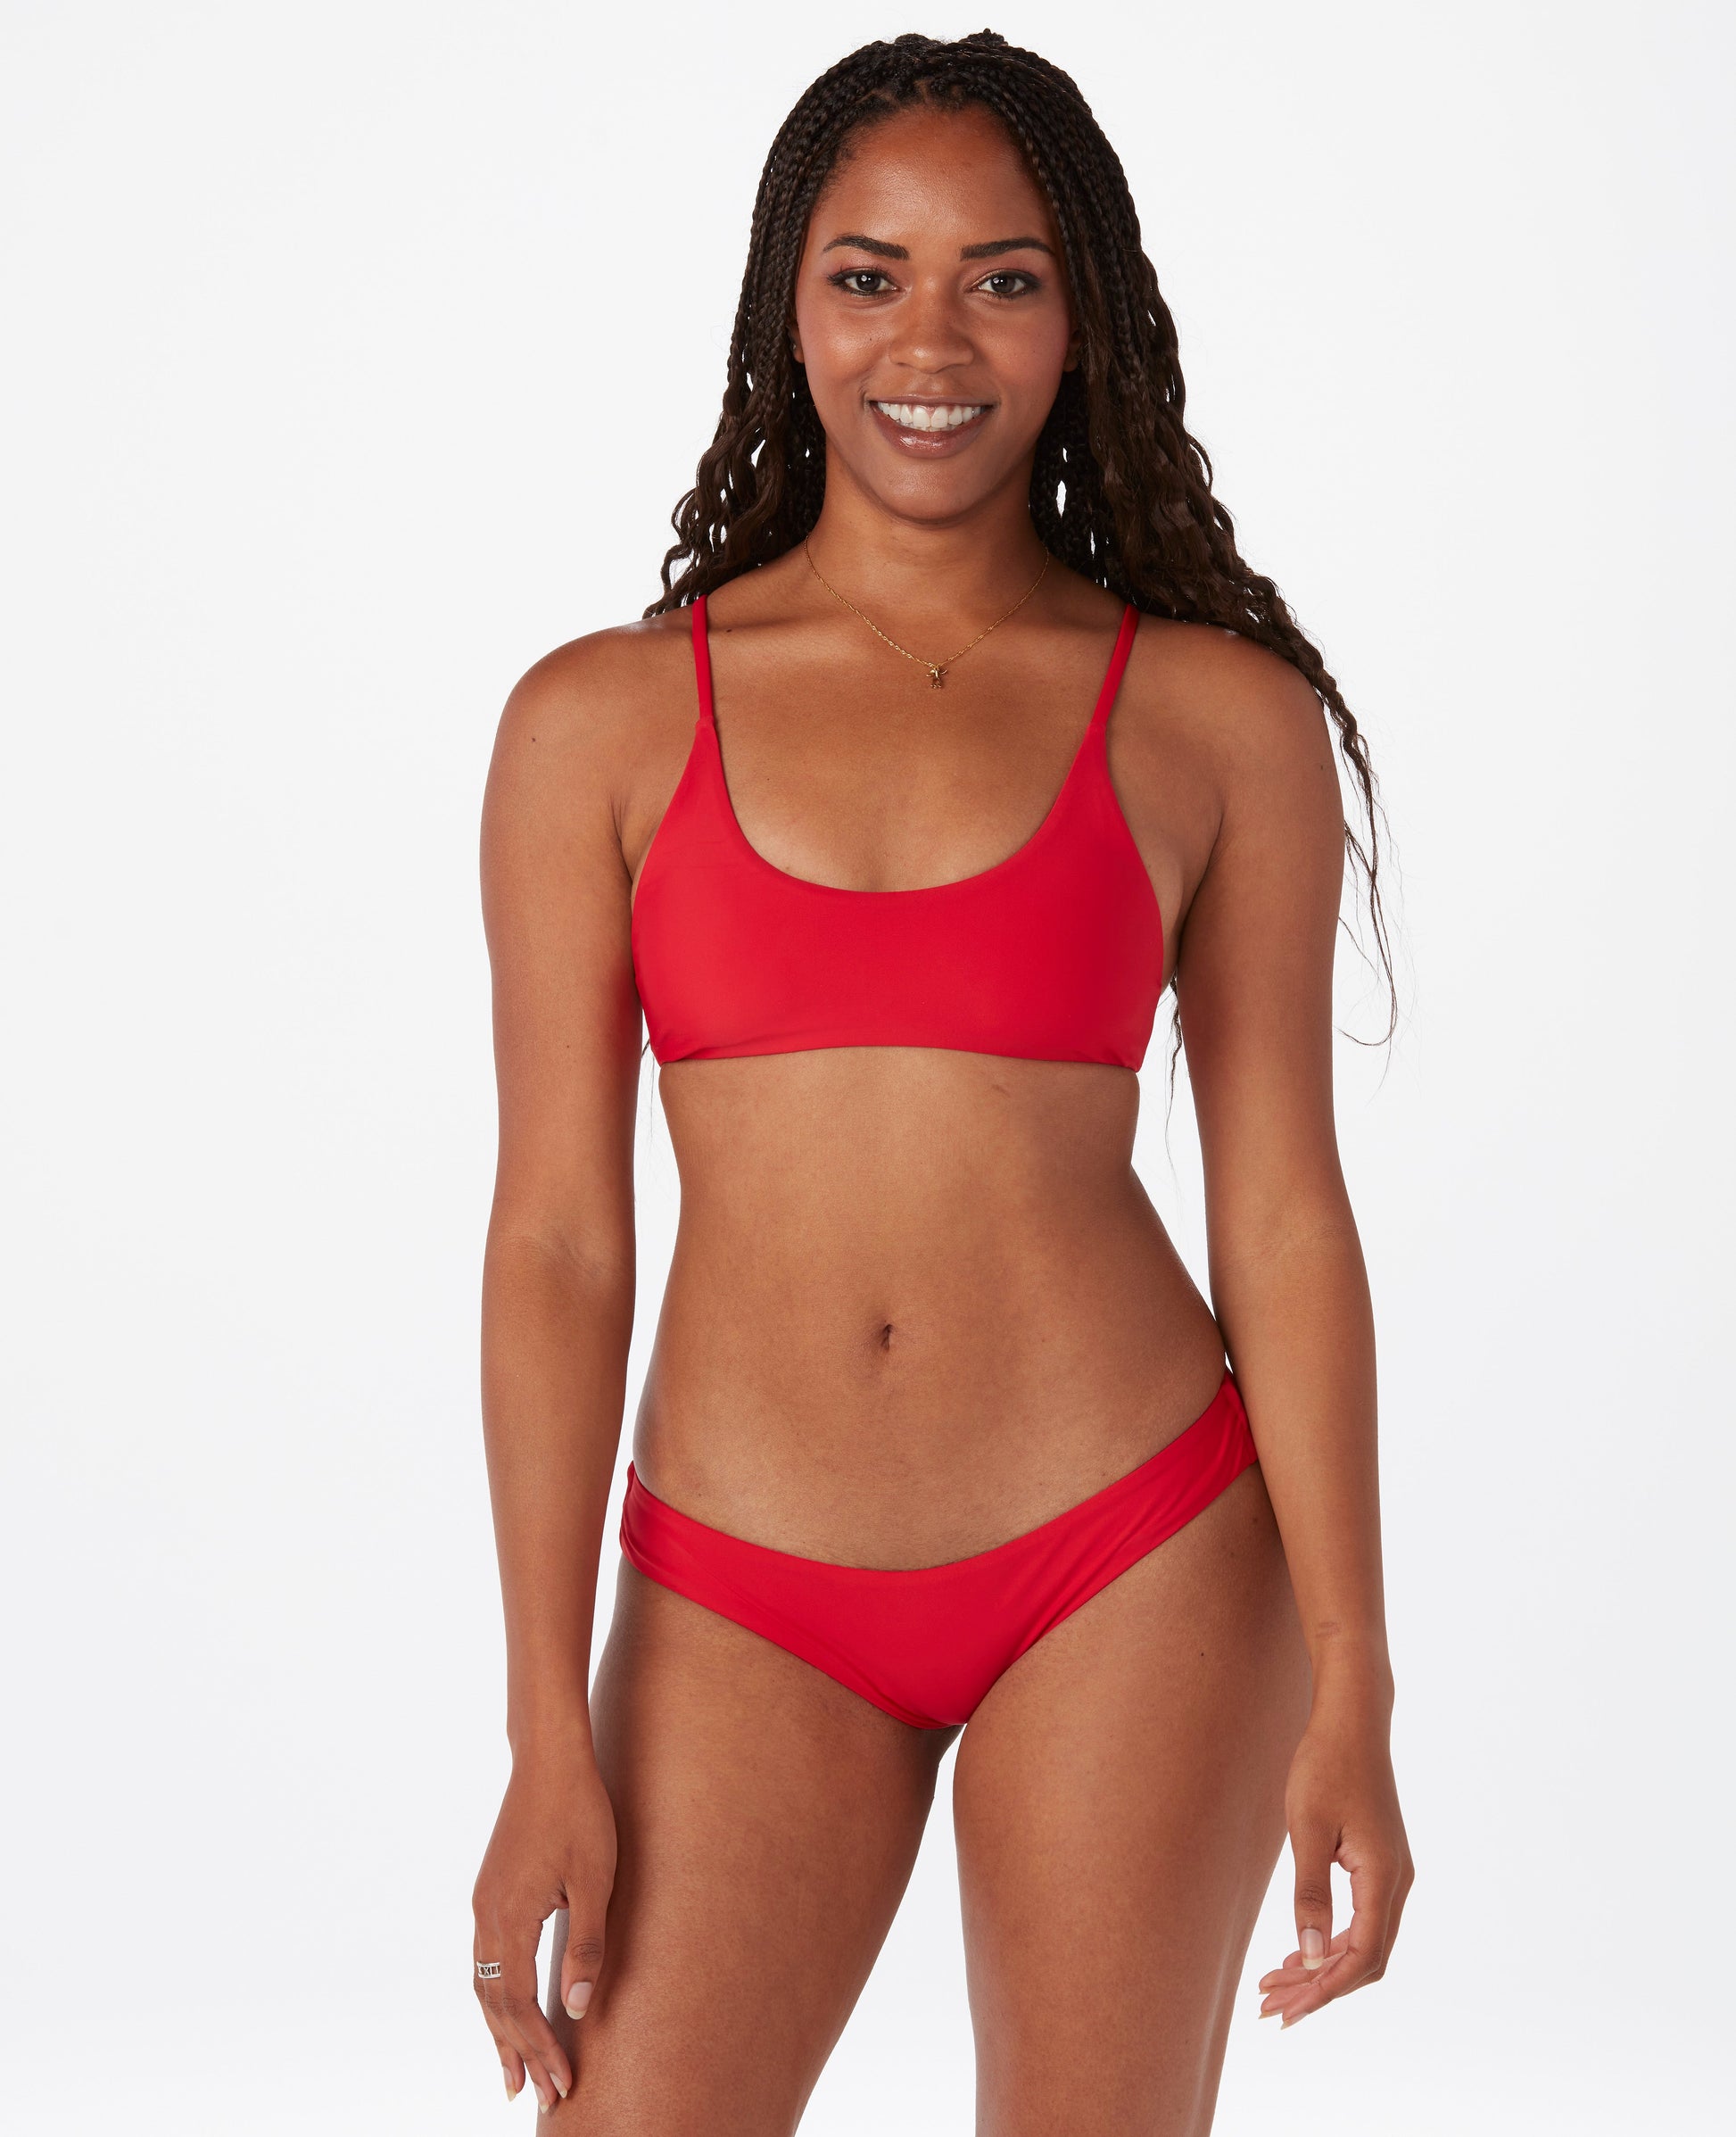 Woman with dark hair against white background, wearing a bright red bikini.